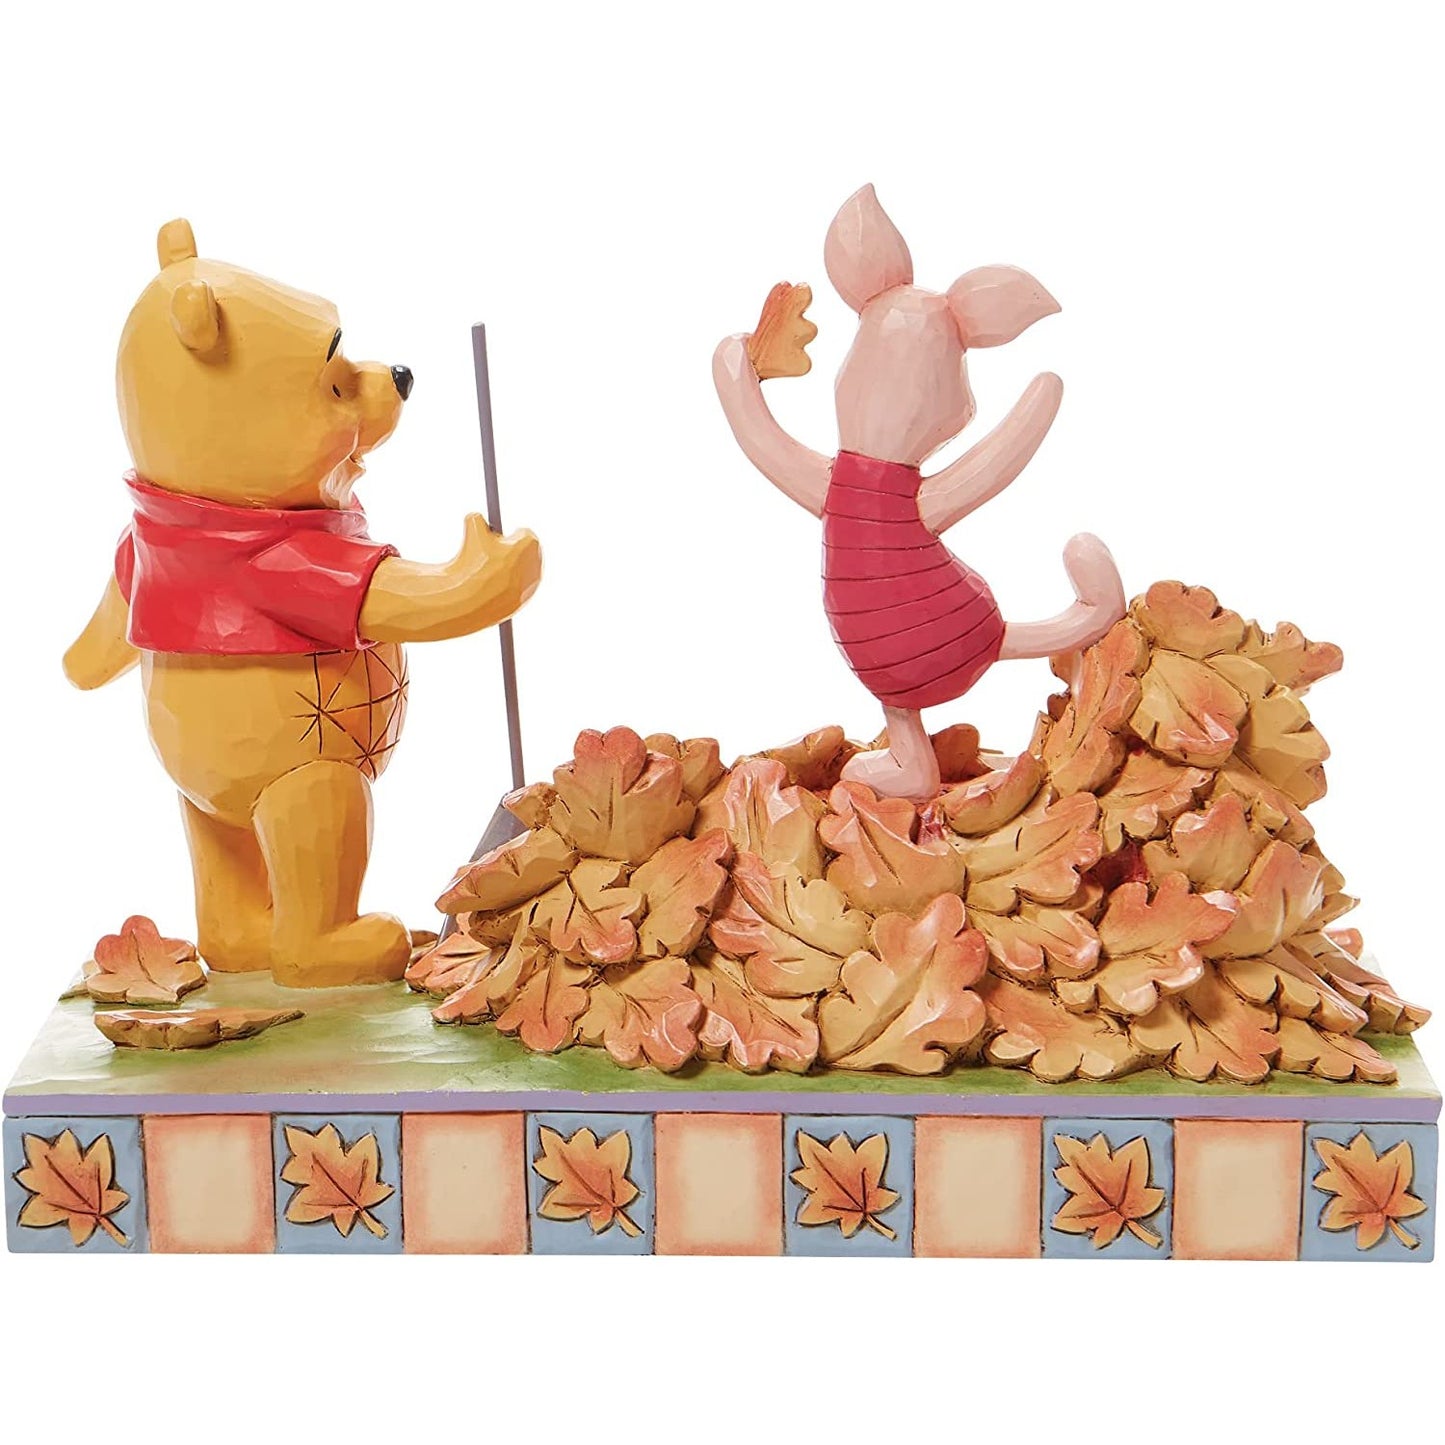 A figurine of Winnie The Pooh and Piglet.